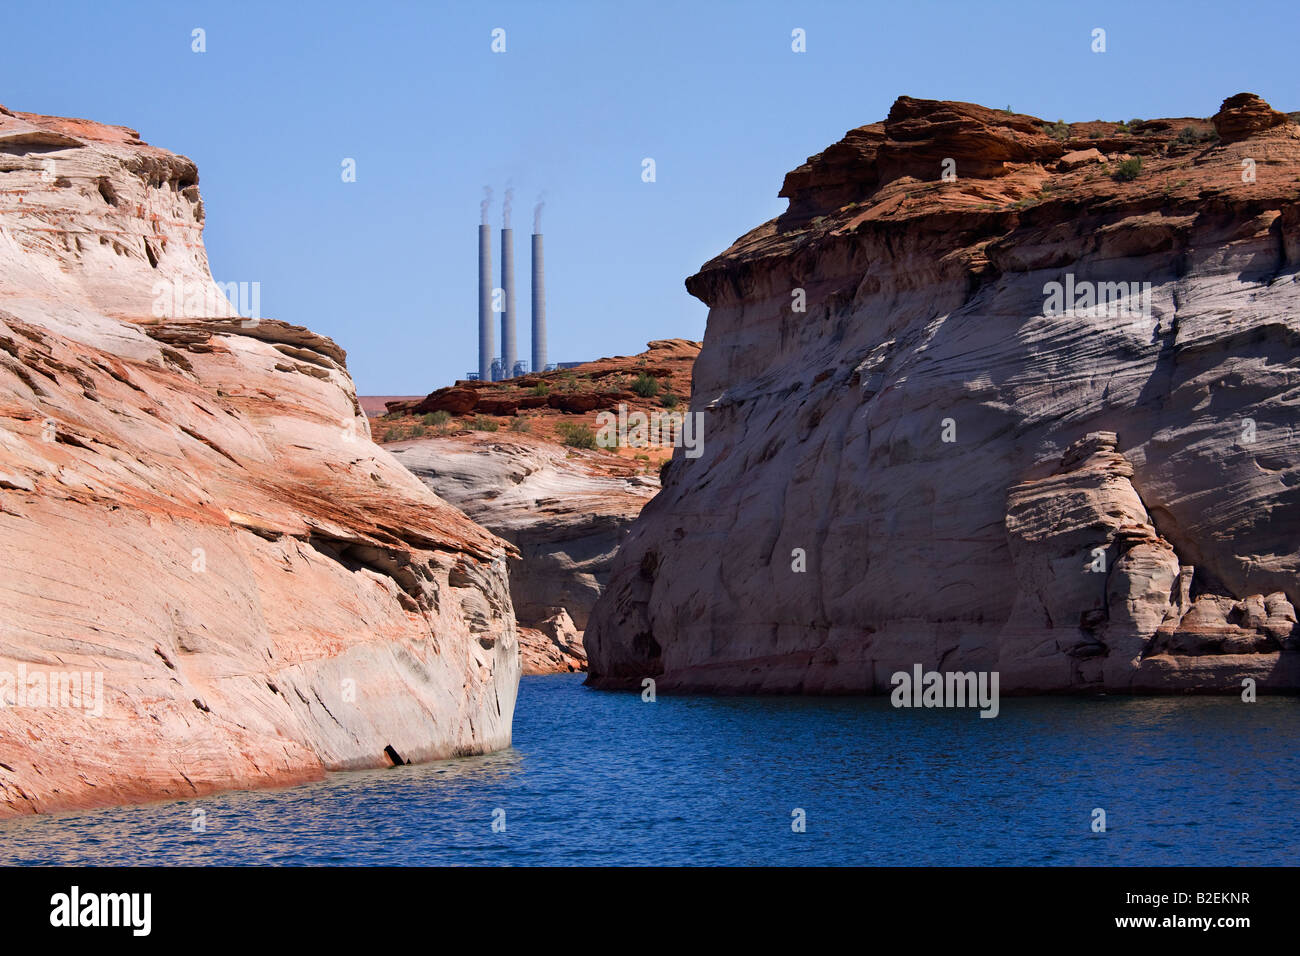 Despoiled wilderness- Coal-fired power plant near to Lake Powell Stock Photo